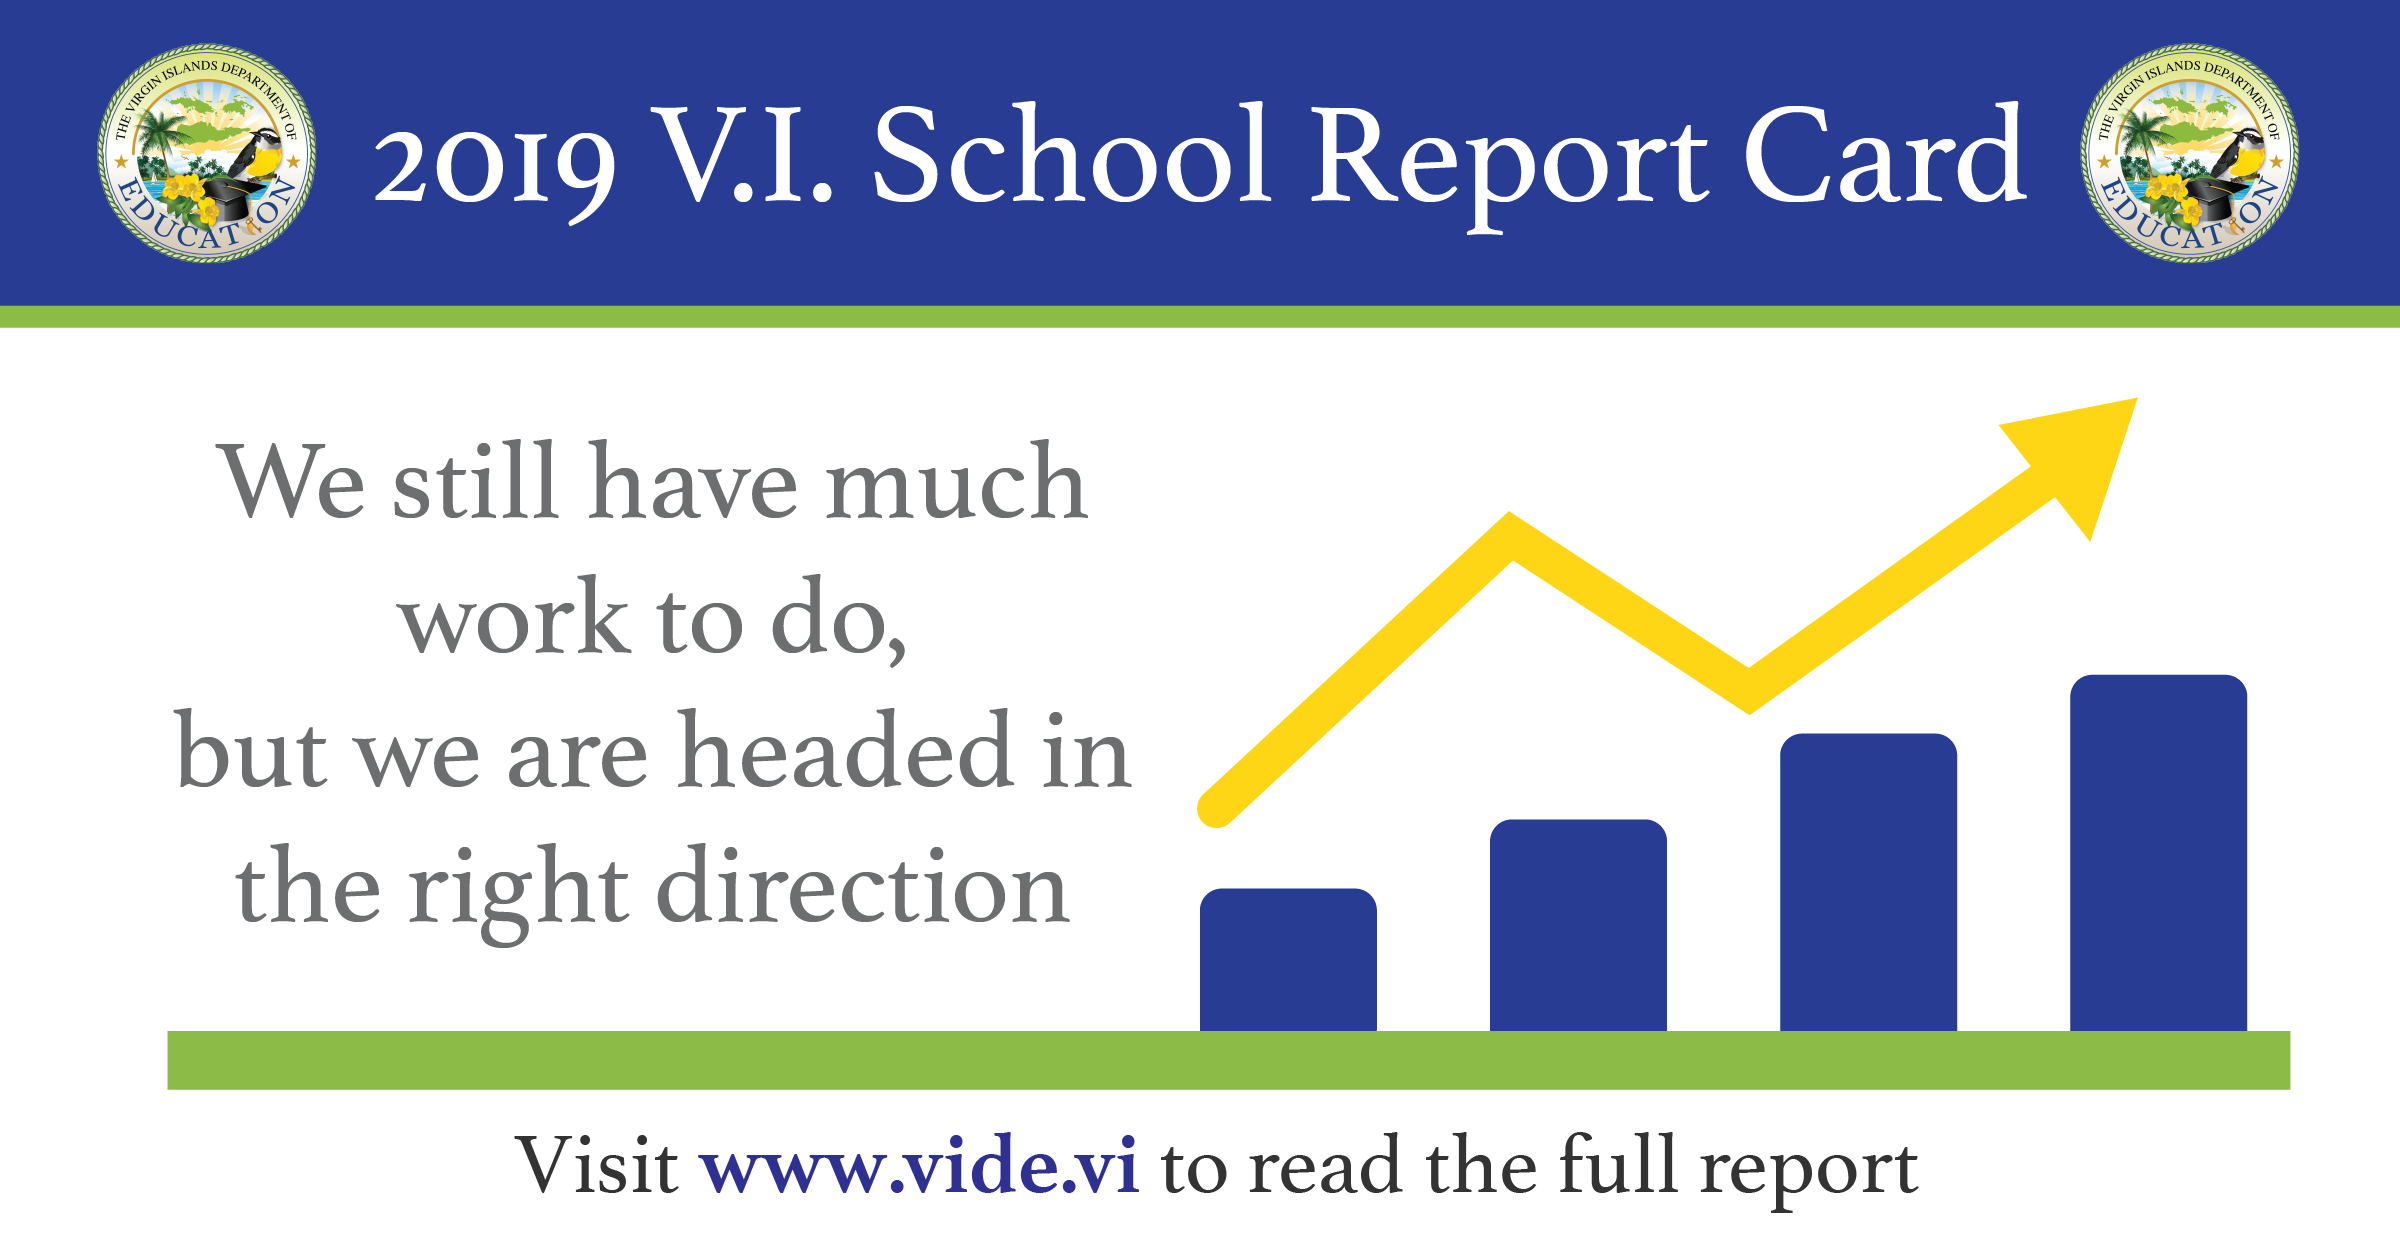 DOE VI REPORT CARD - Much to do, right direction-01-01.png